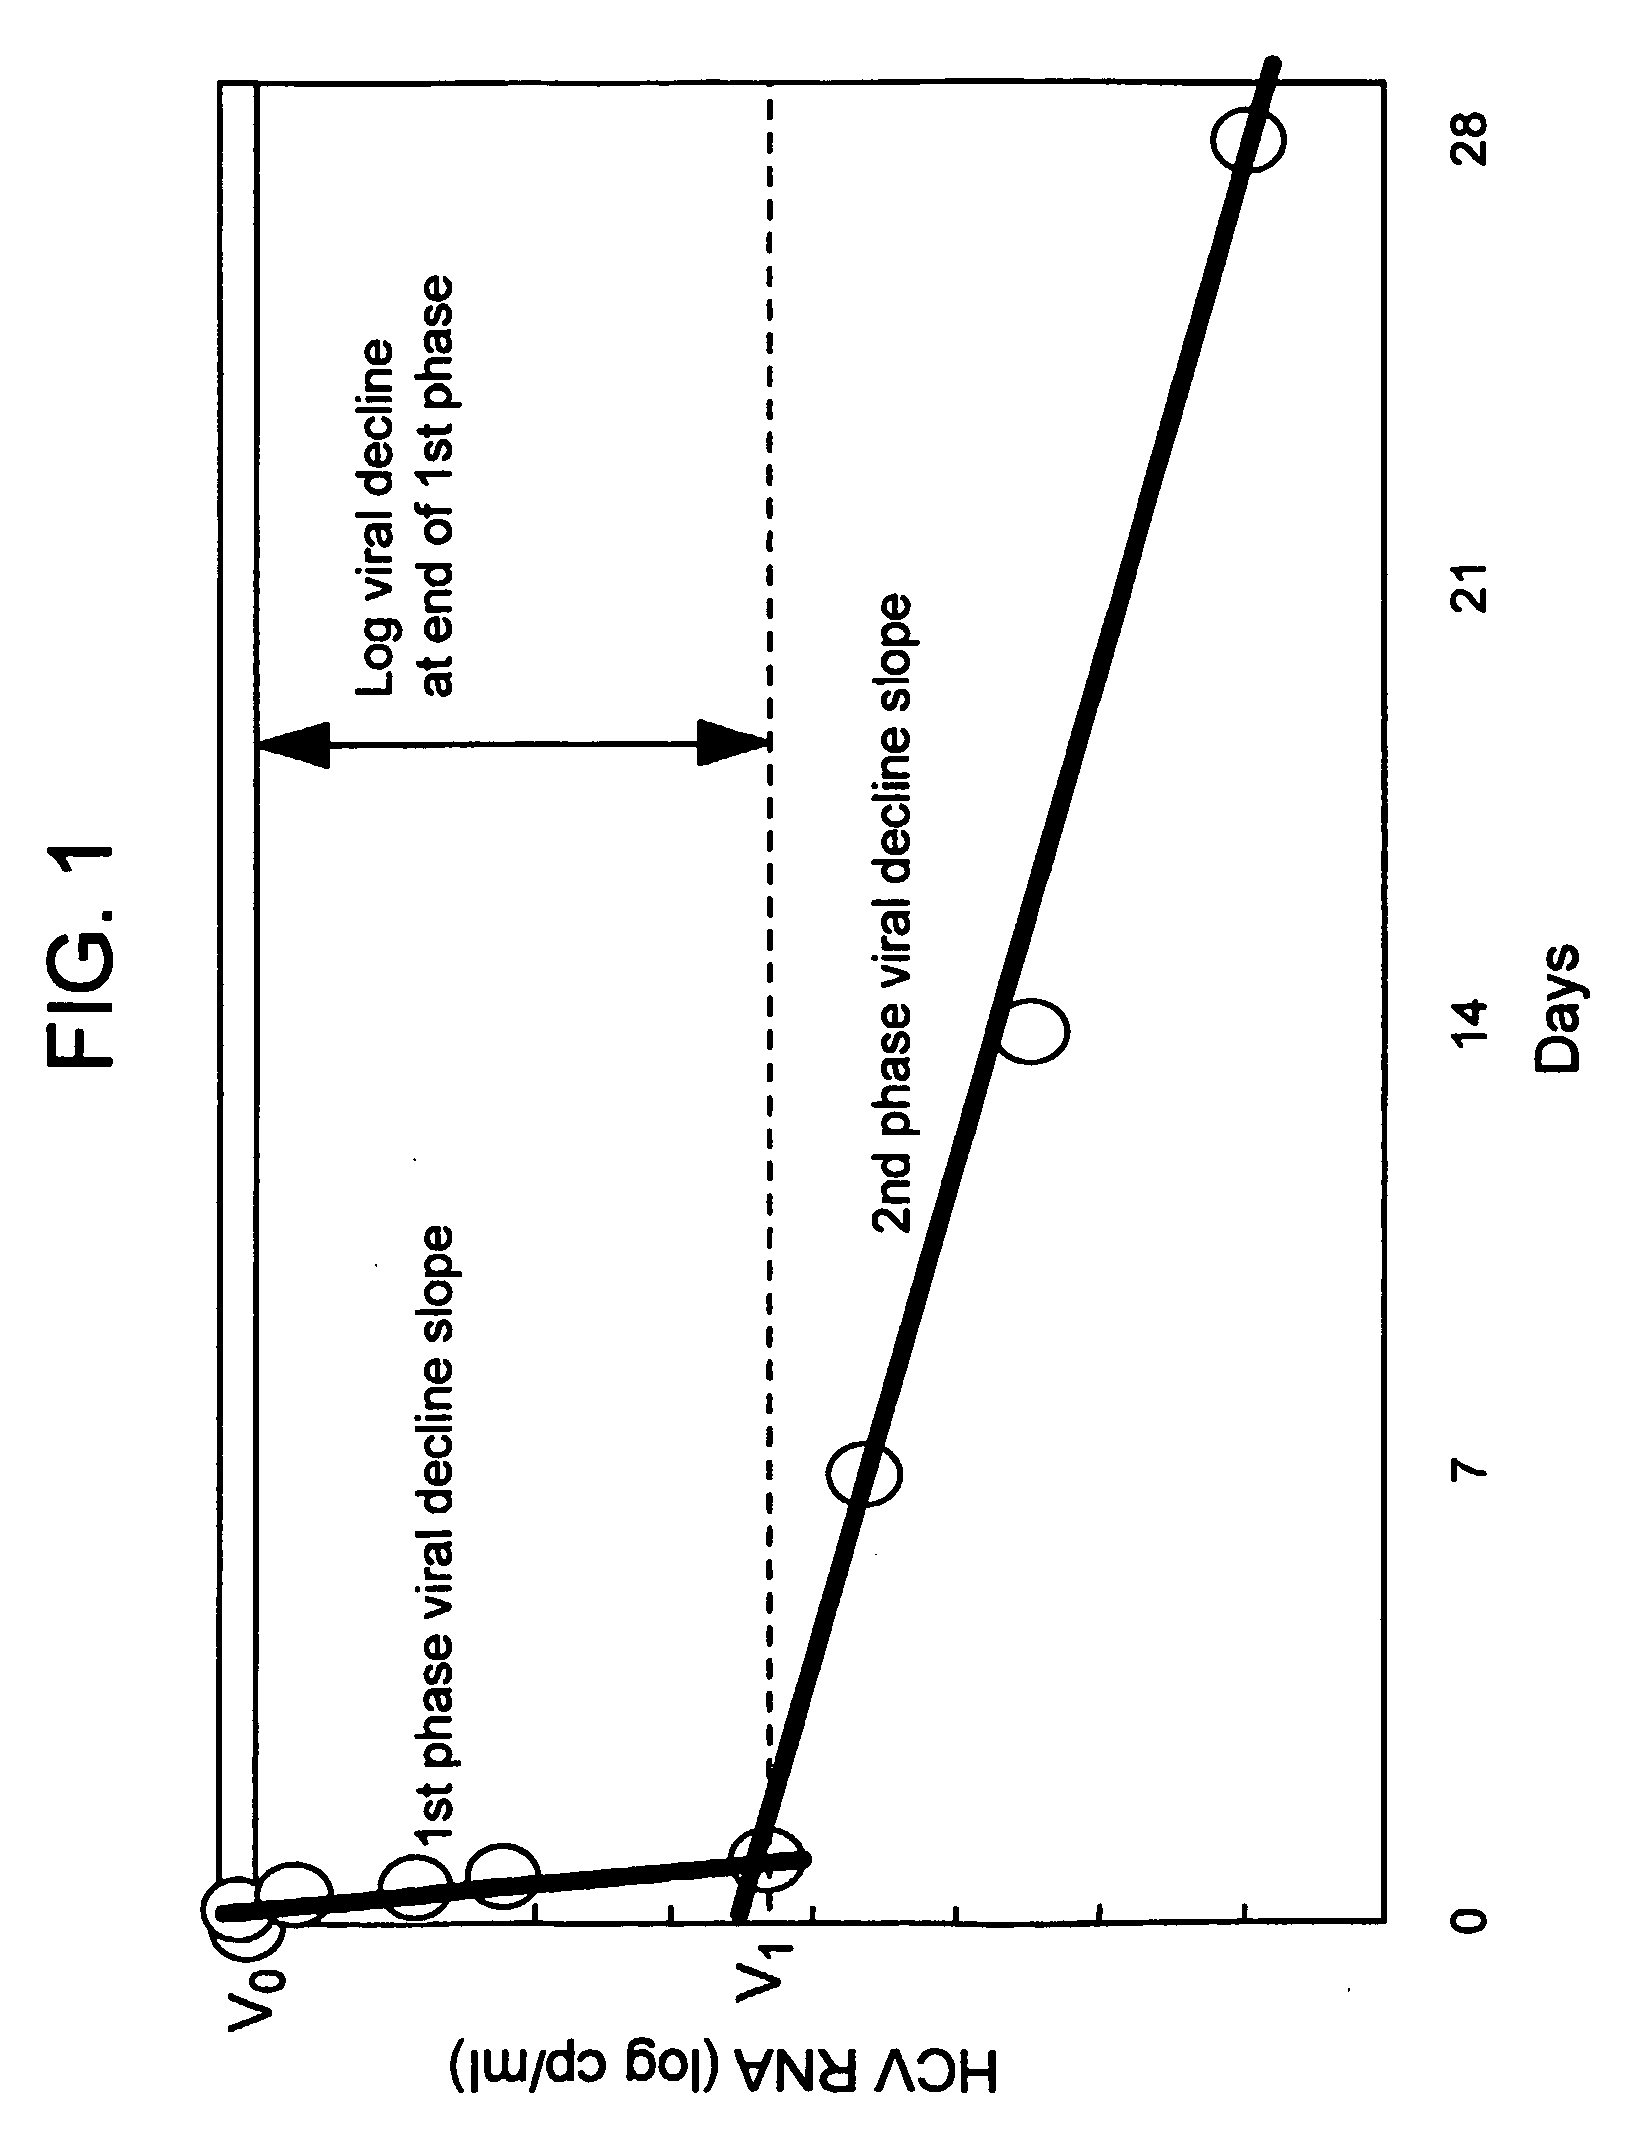 Compositions and method for treating hepatitis virus infection